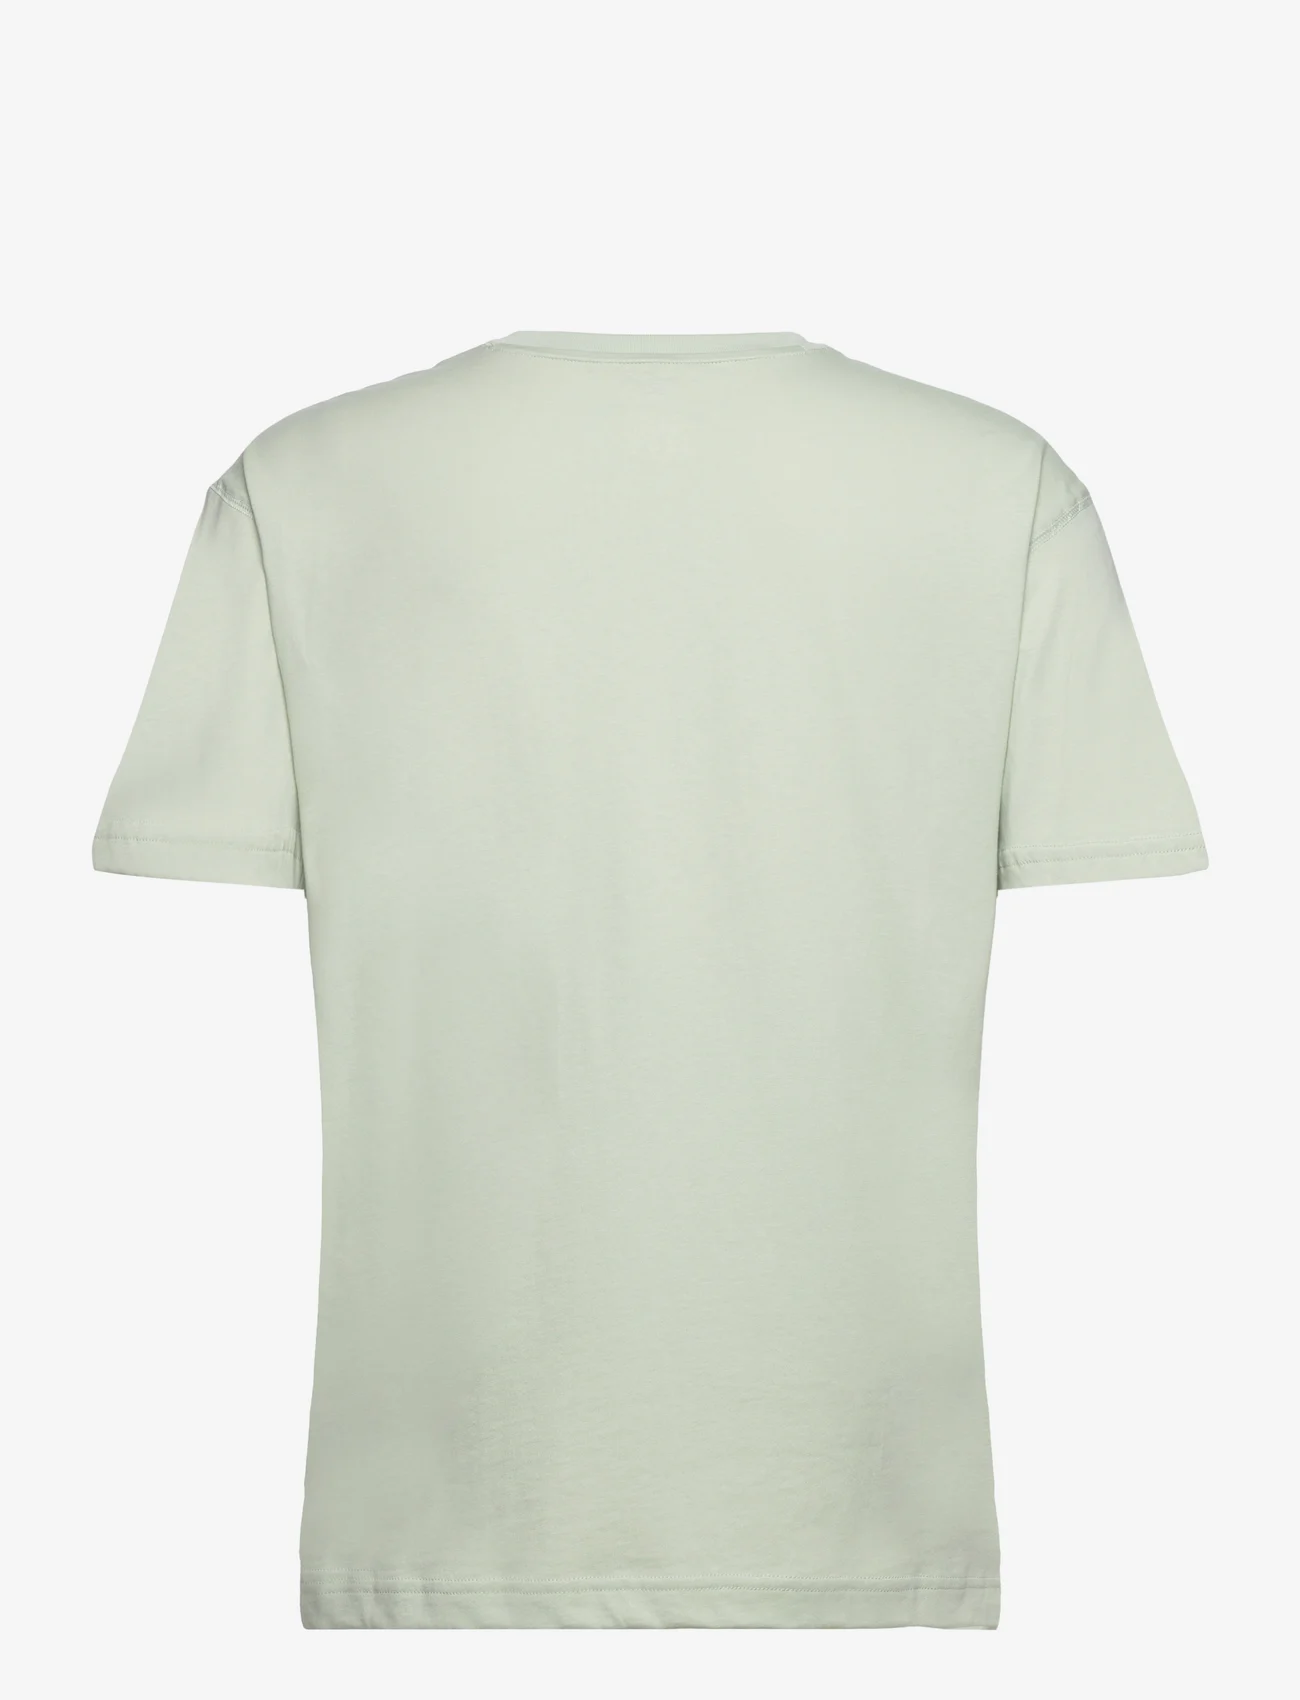 New Balance - Uni-ssentials Cotton T-Shirt - lowest prices - silver moss - 1